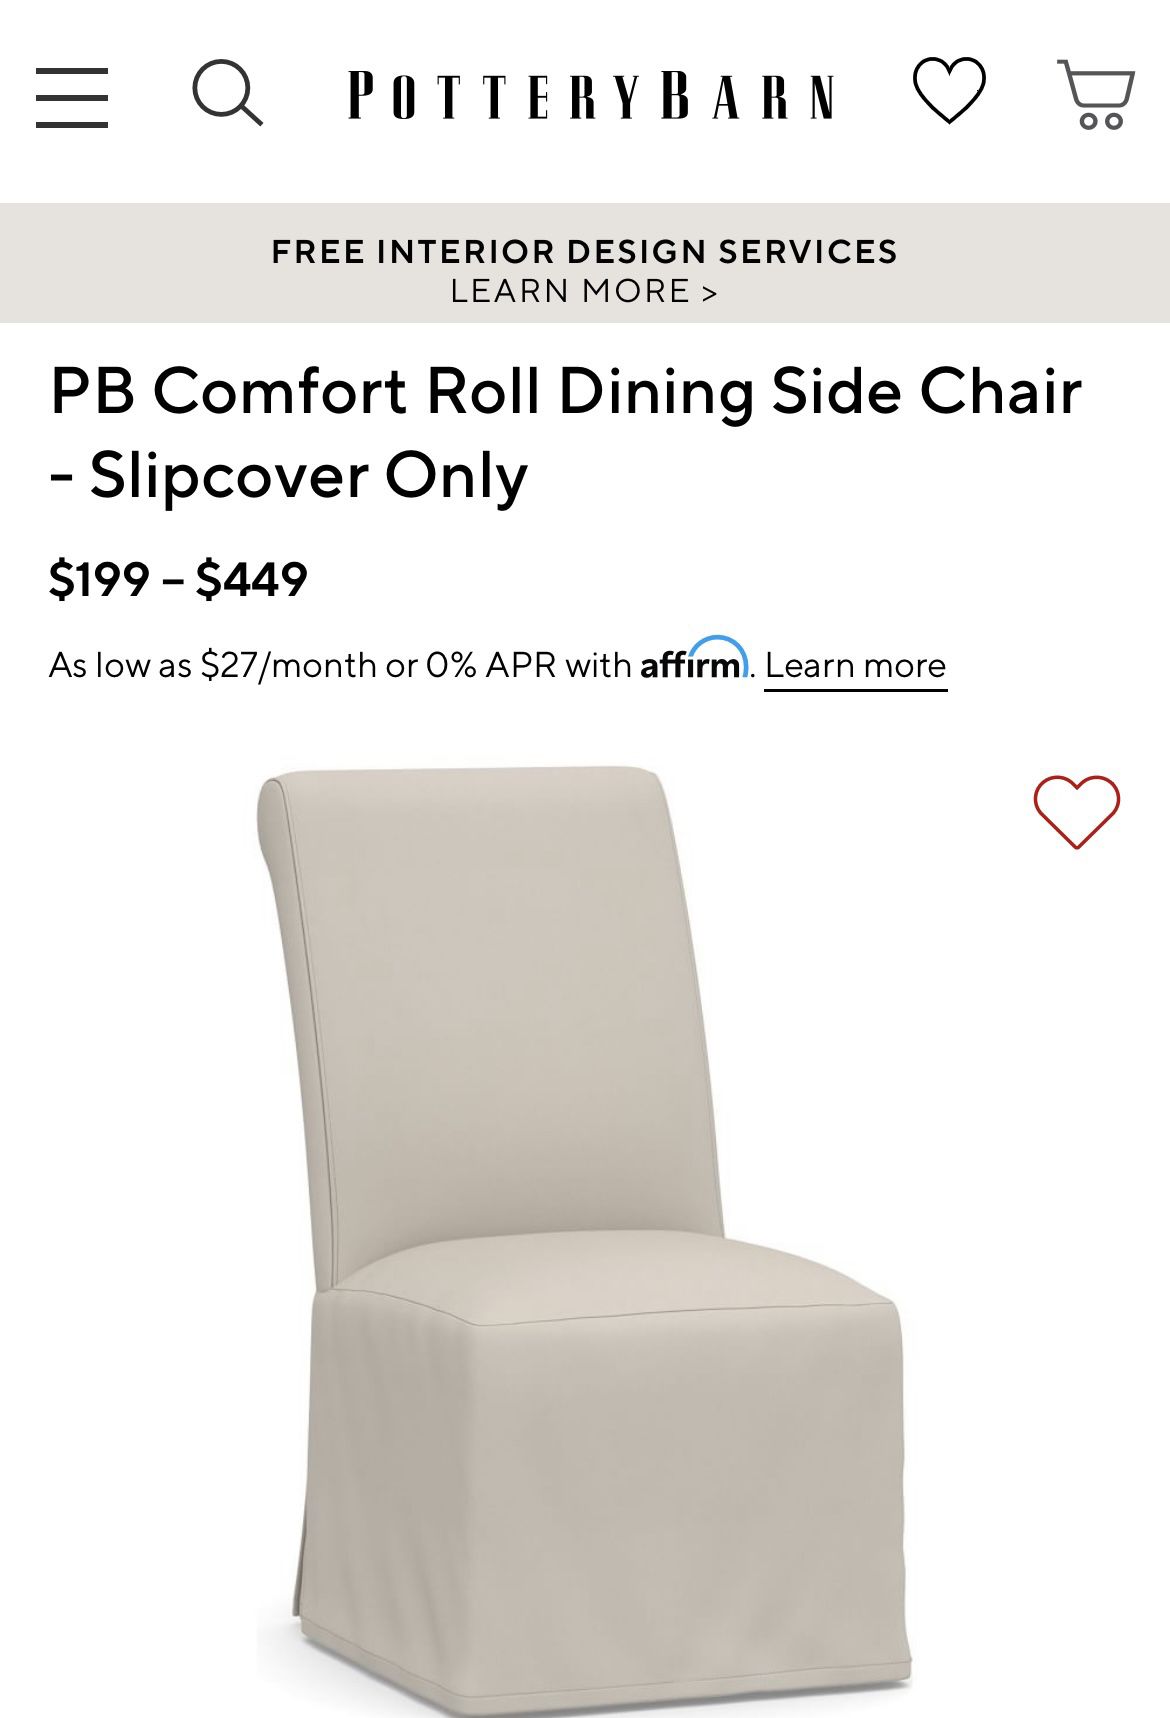 Pottery Barn Comfort Roll Dining Side Chair Slip covers (6)